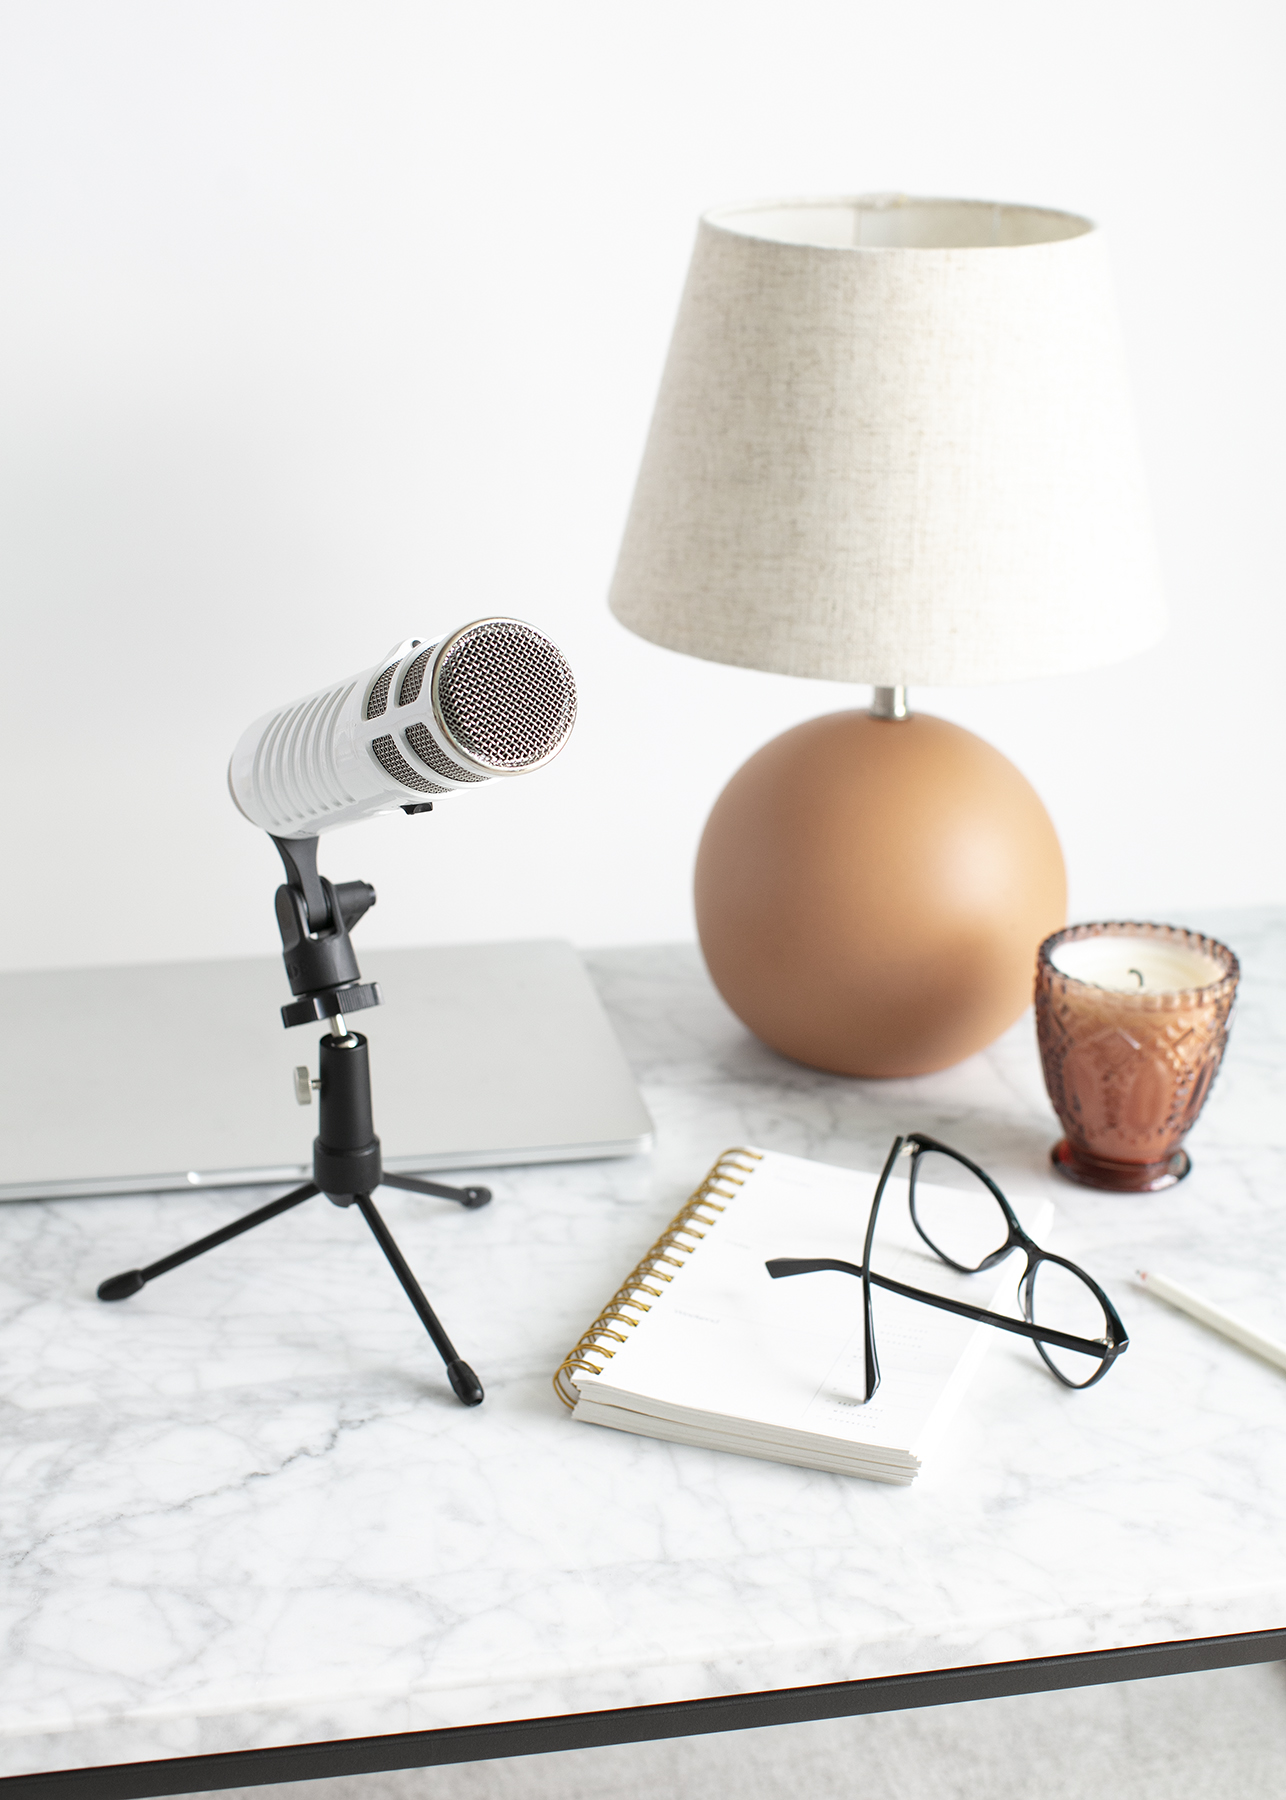 6 Podcasts That Will Make You a Better Business Owner | Emily Moore | Private Photo Editor | www.emilymoorephoto.com | Looking for extra free education that will help you become a better business owner? Check out these 6 podcasts that are great for small business owners and creatives!